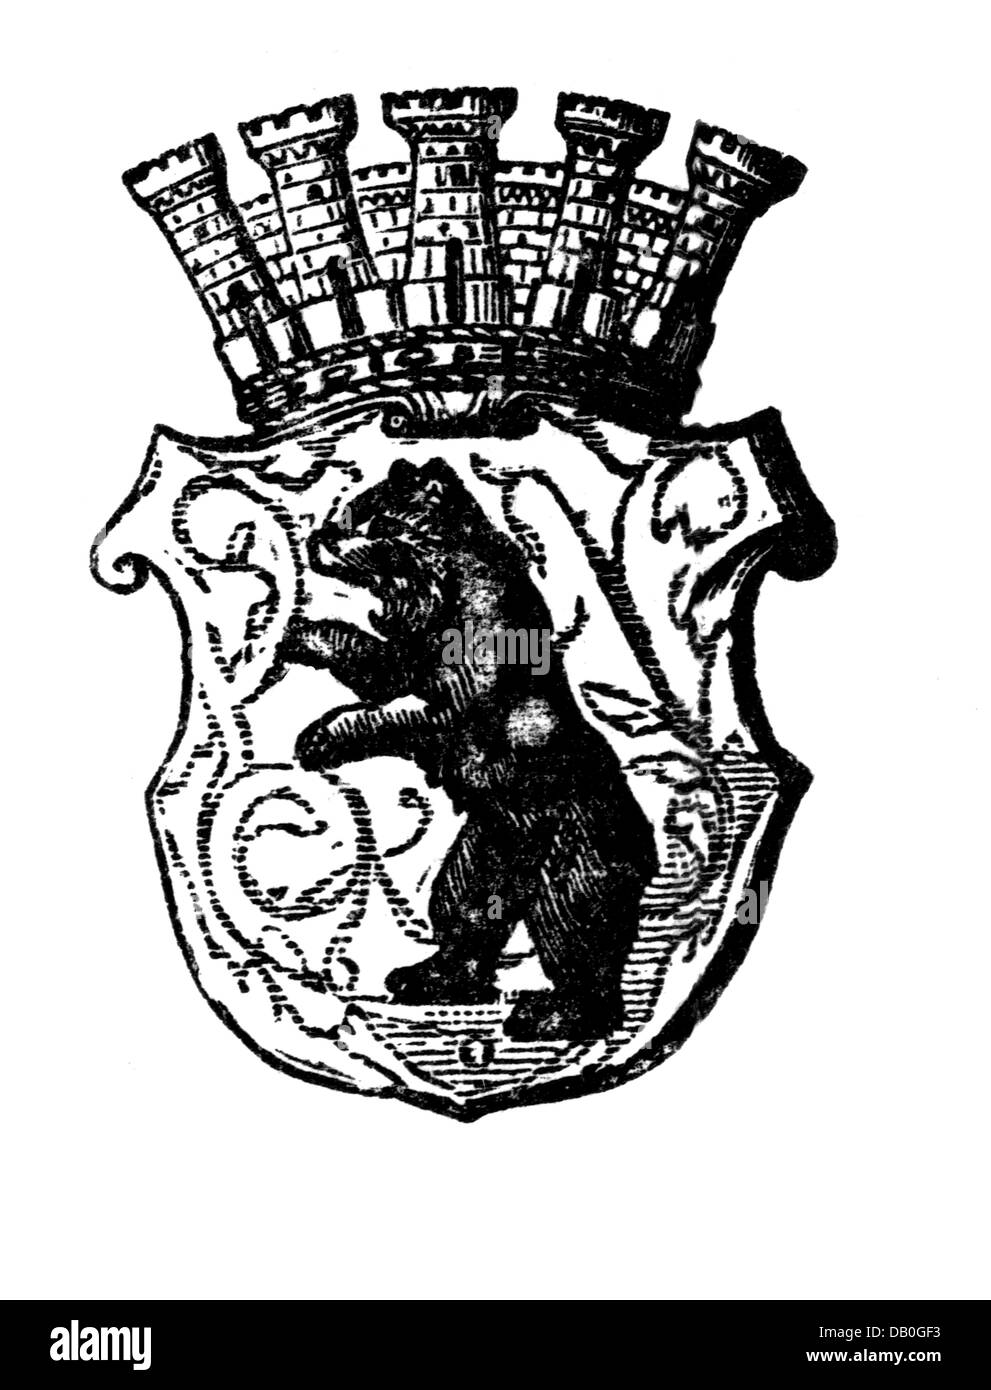 heraldry, coat of arms, Germany, city arms, Berlin, wood engraving, late 19th century, eagle, bear, Kingdom of Prussia, German Empire, Imperial Era,Central Europe, historic, historical, Additional-Rights-Clearences-Not Available Stock Photo